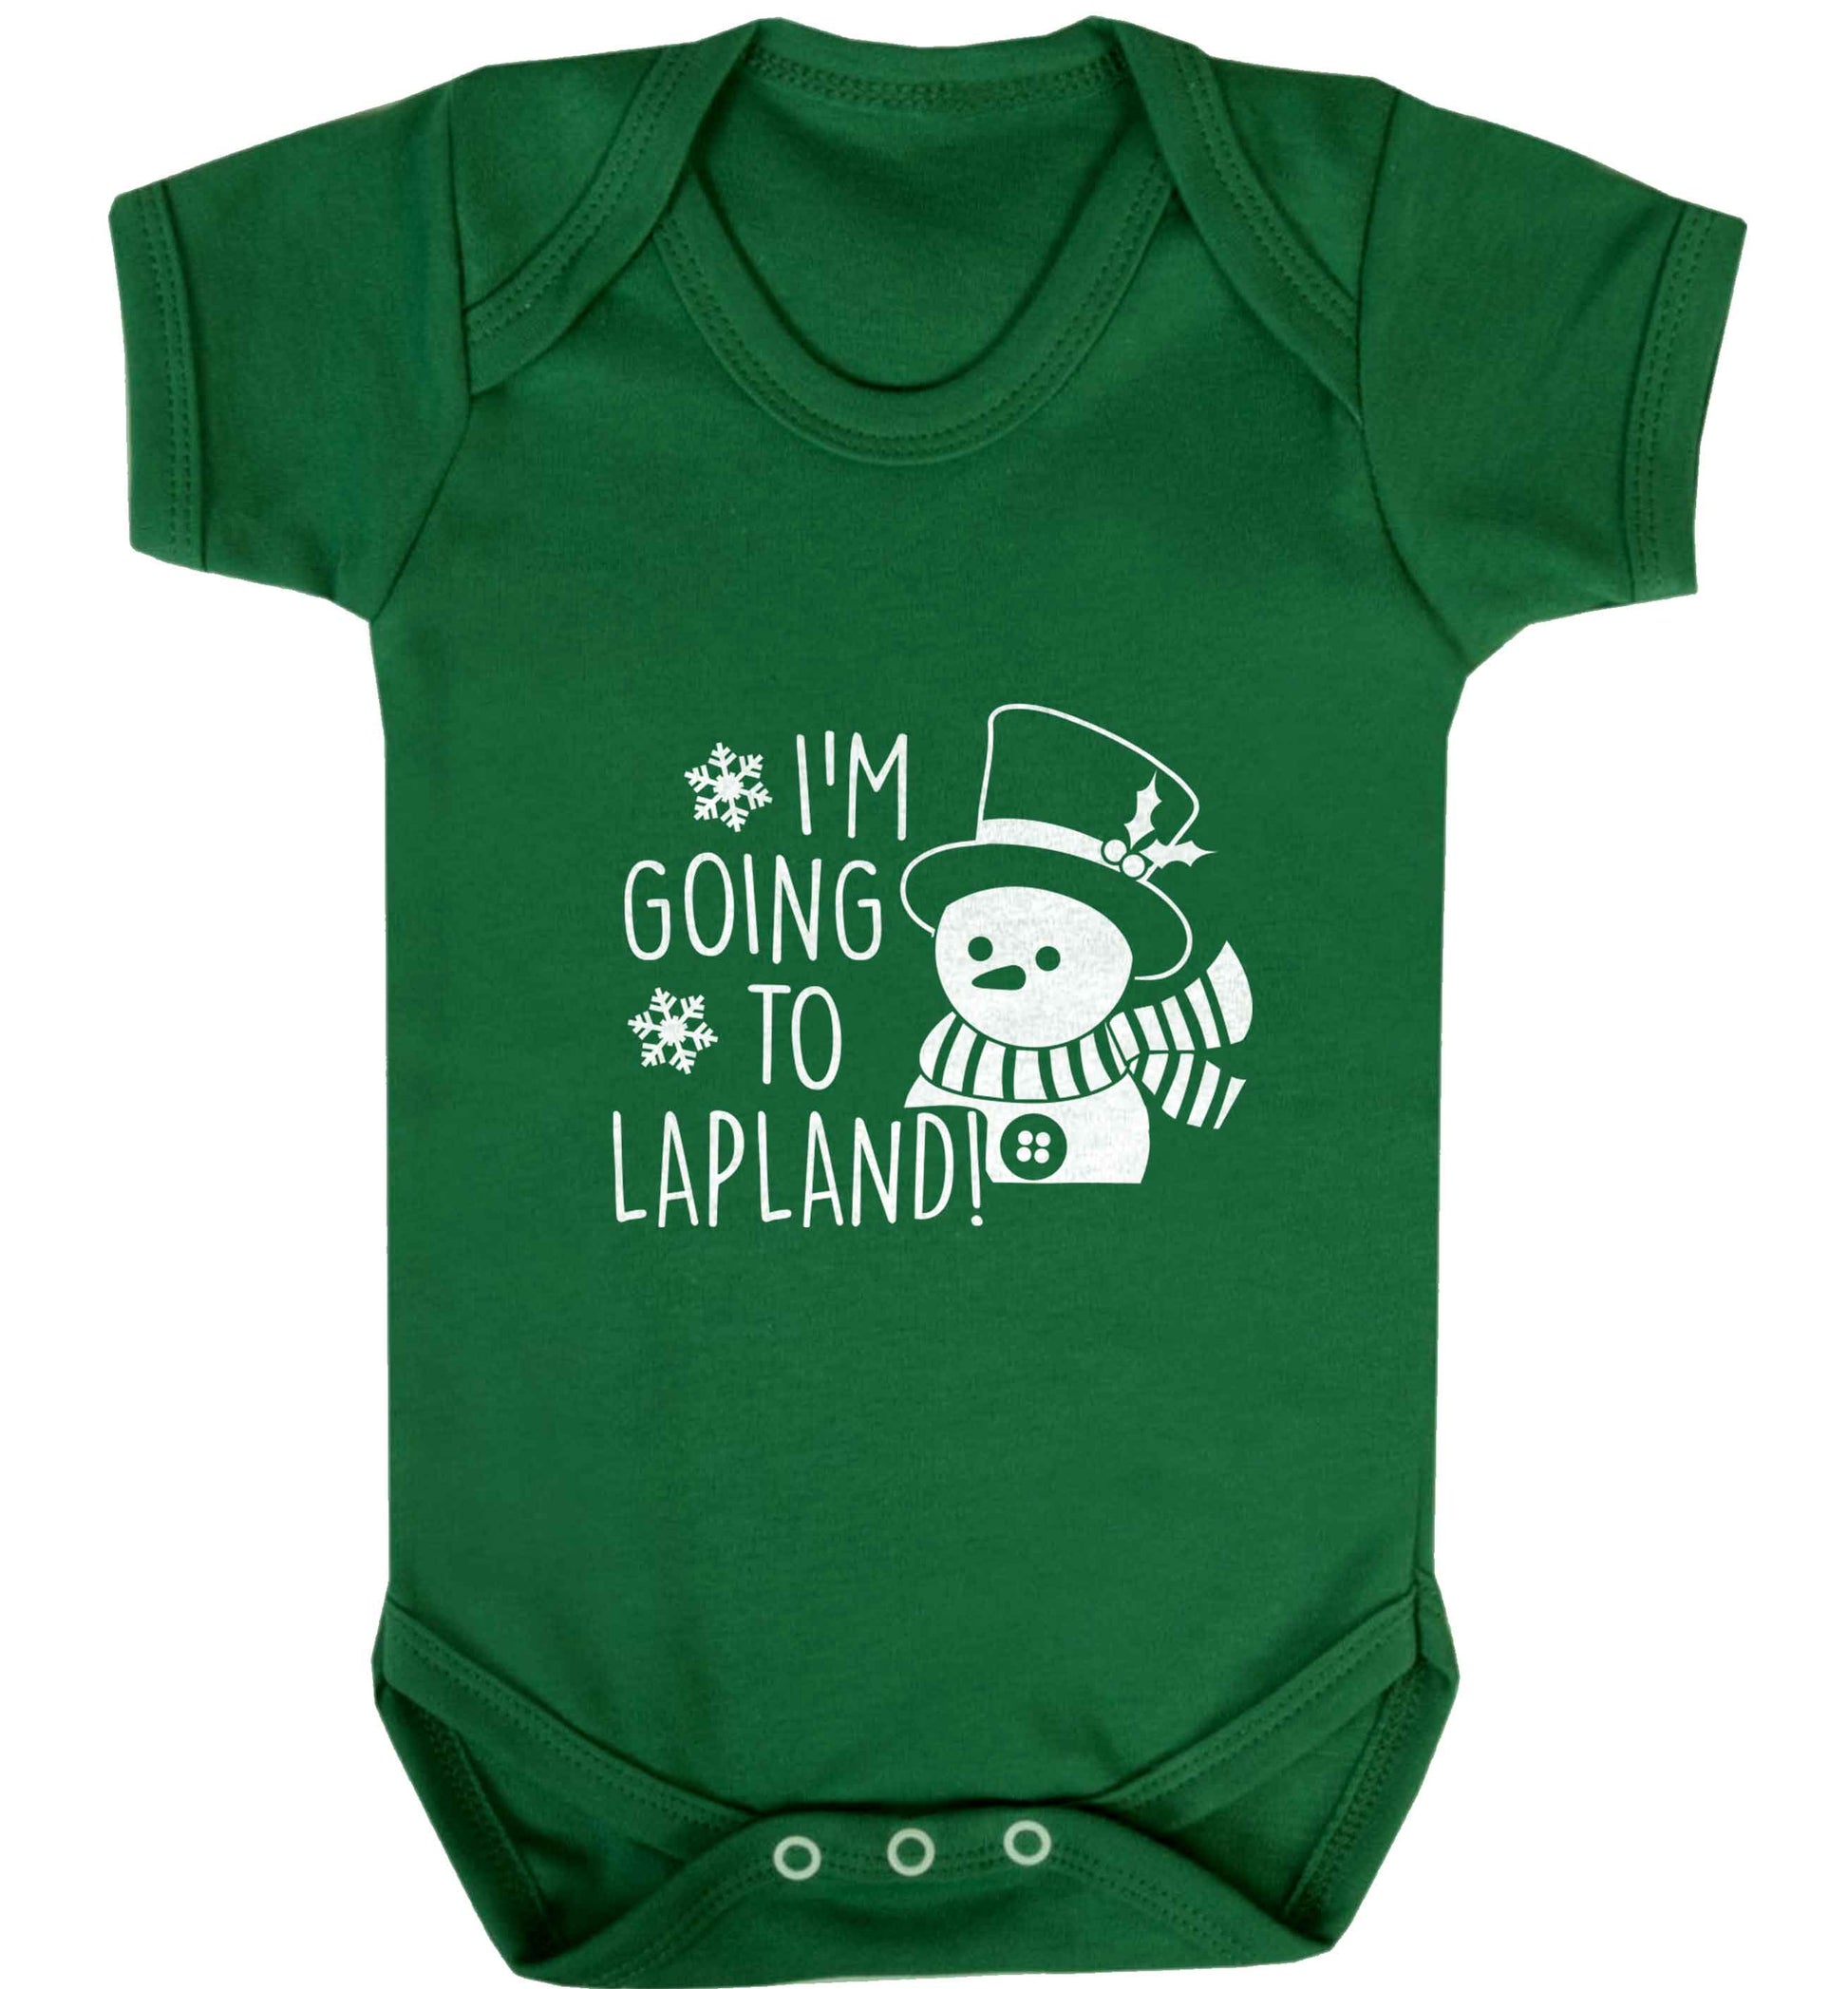 I'm going to Lapland baby vest green 18-24 months